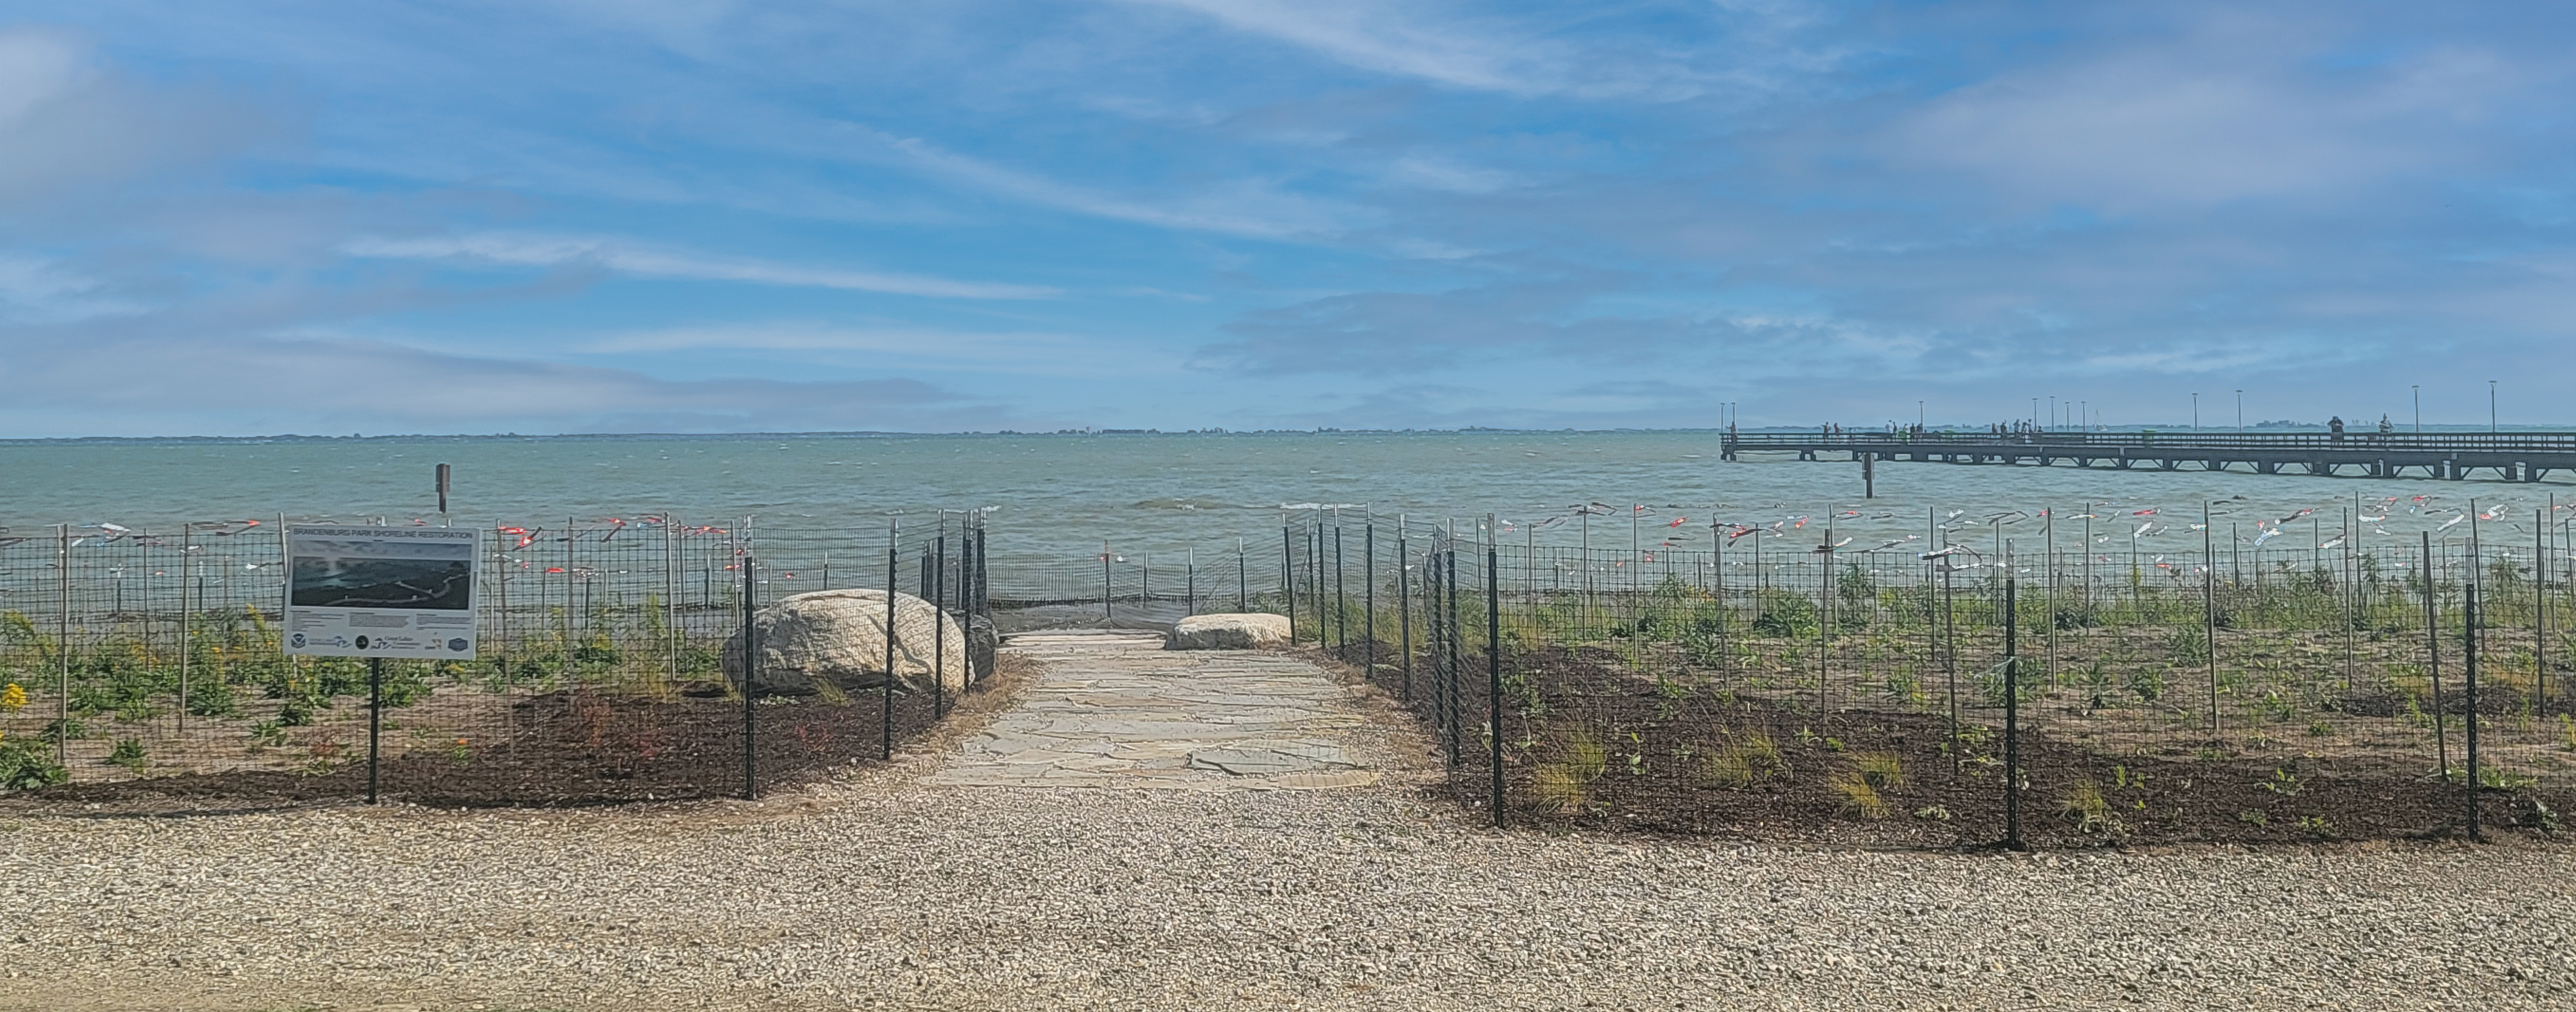 The project's construction access road was converted into a multi-use path with Steppingstone and other new features foster fostering connectivity with the shoreline.